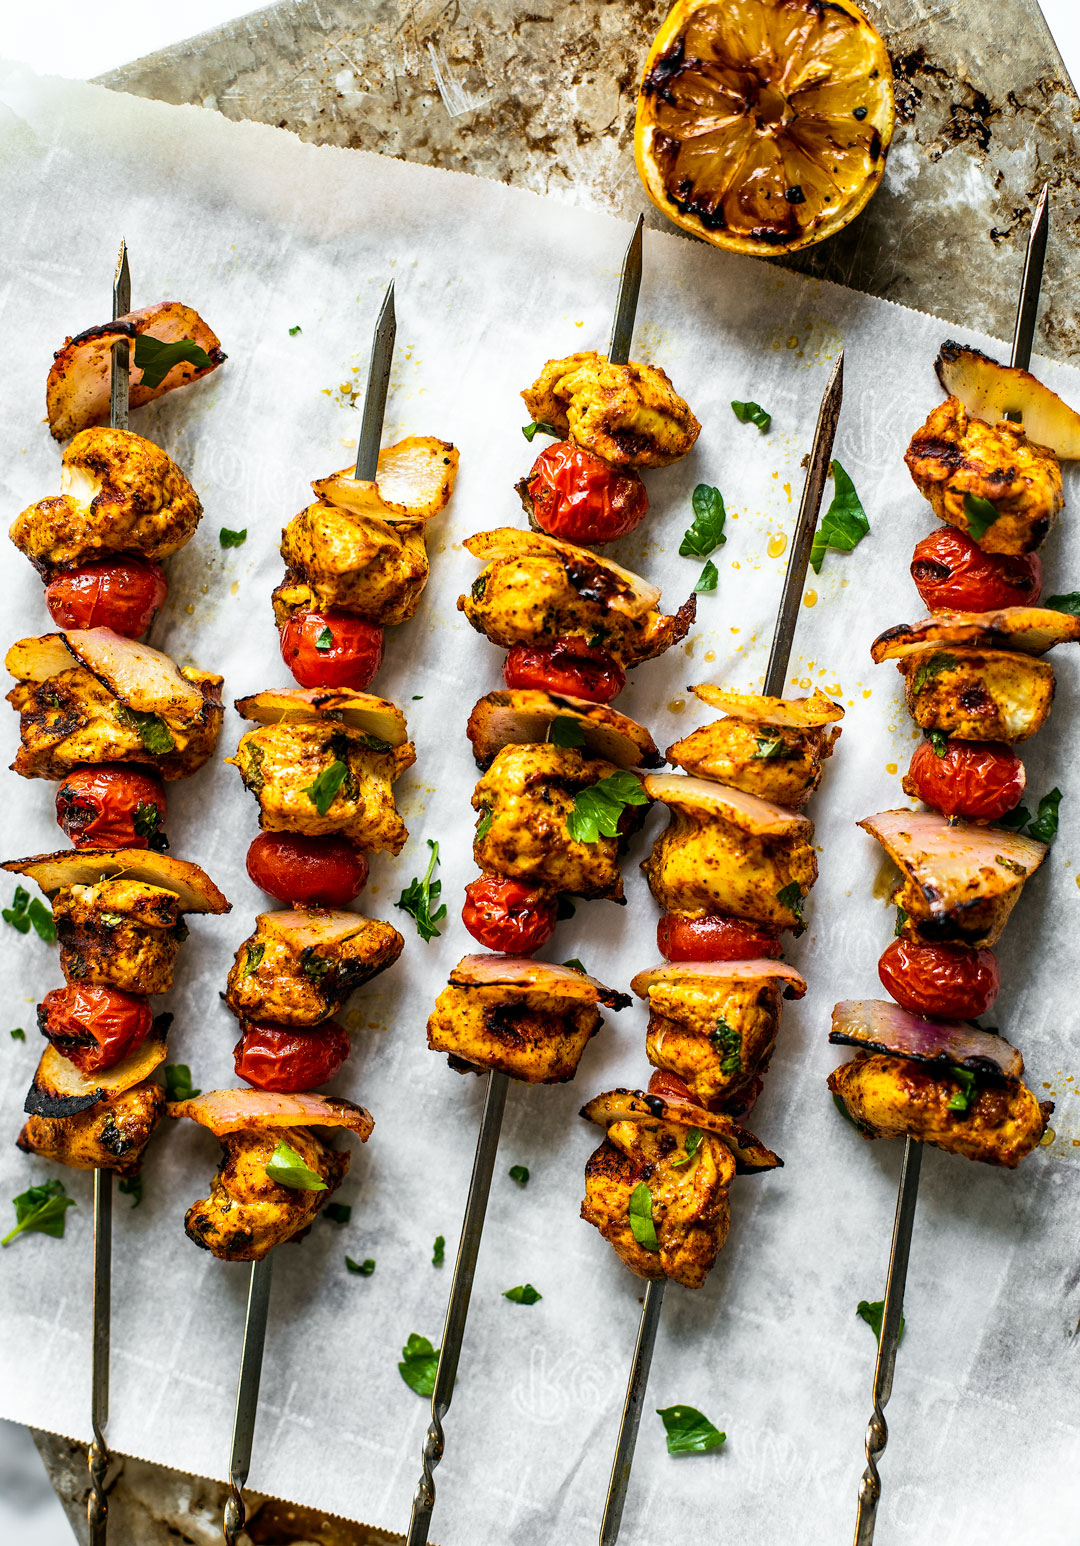 Grilled Moroccan chicken skewers set out over parchment paper with a grilled lemon half on the side.